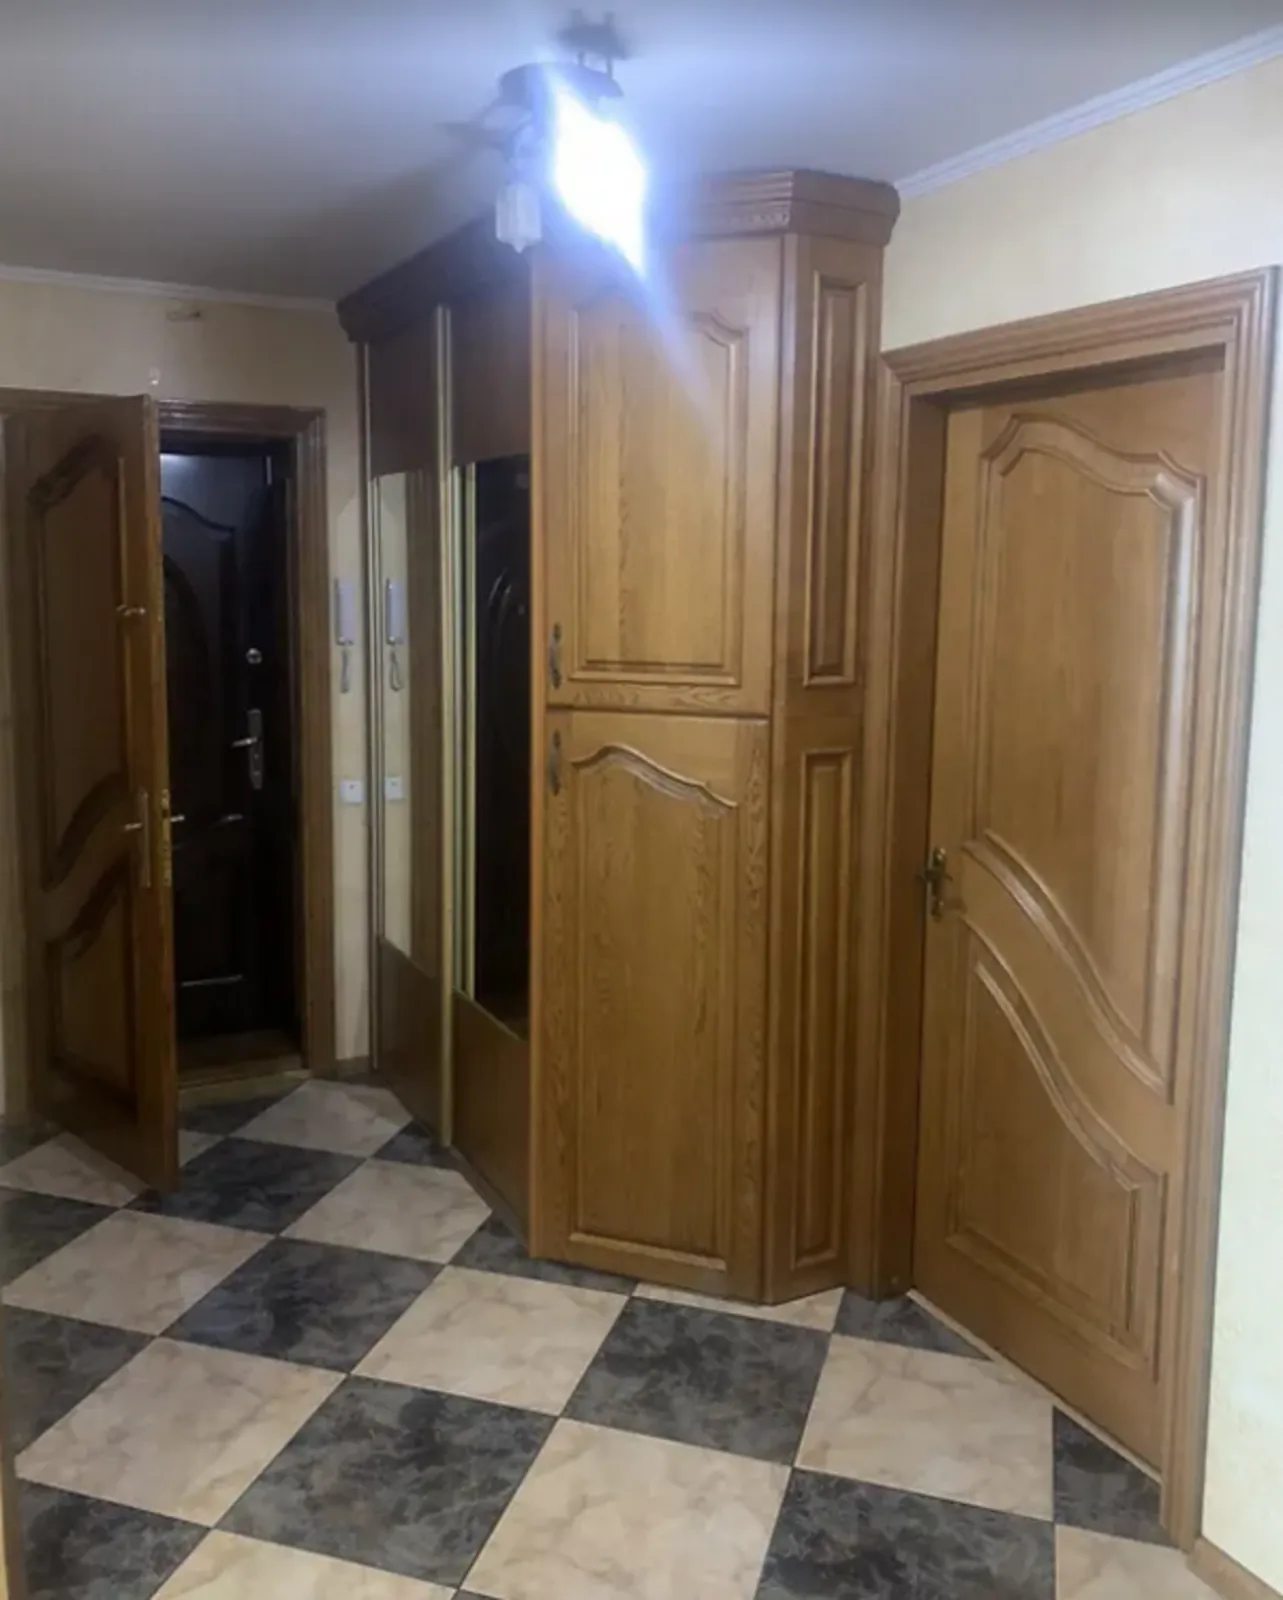 Apartments for sale. 3 rooms, 80 m², 1st floor/9 floors. Bam, Ternopil. 